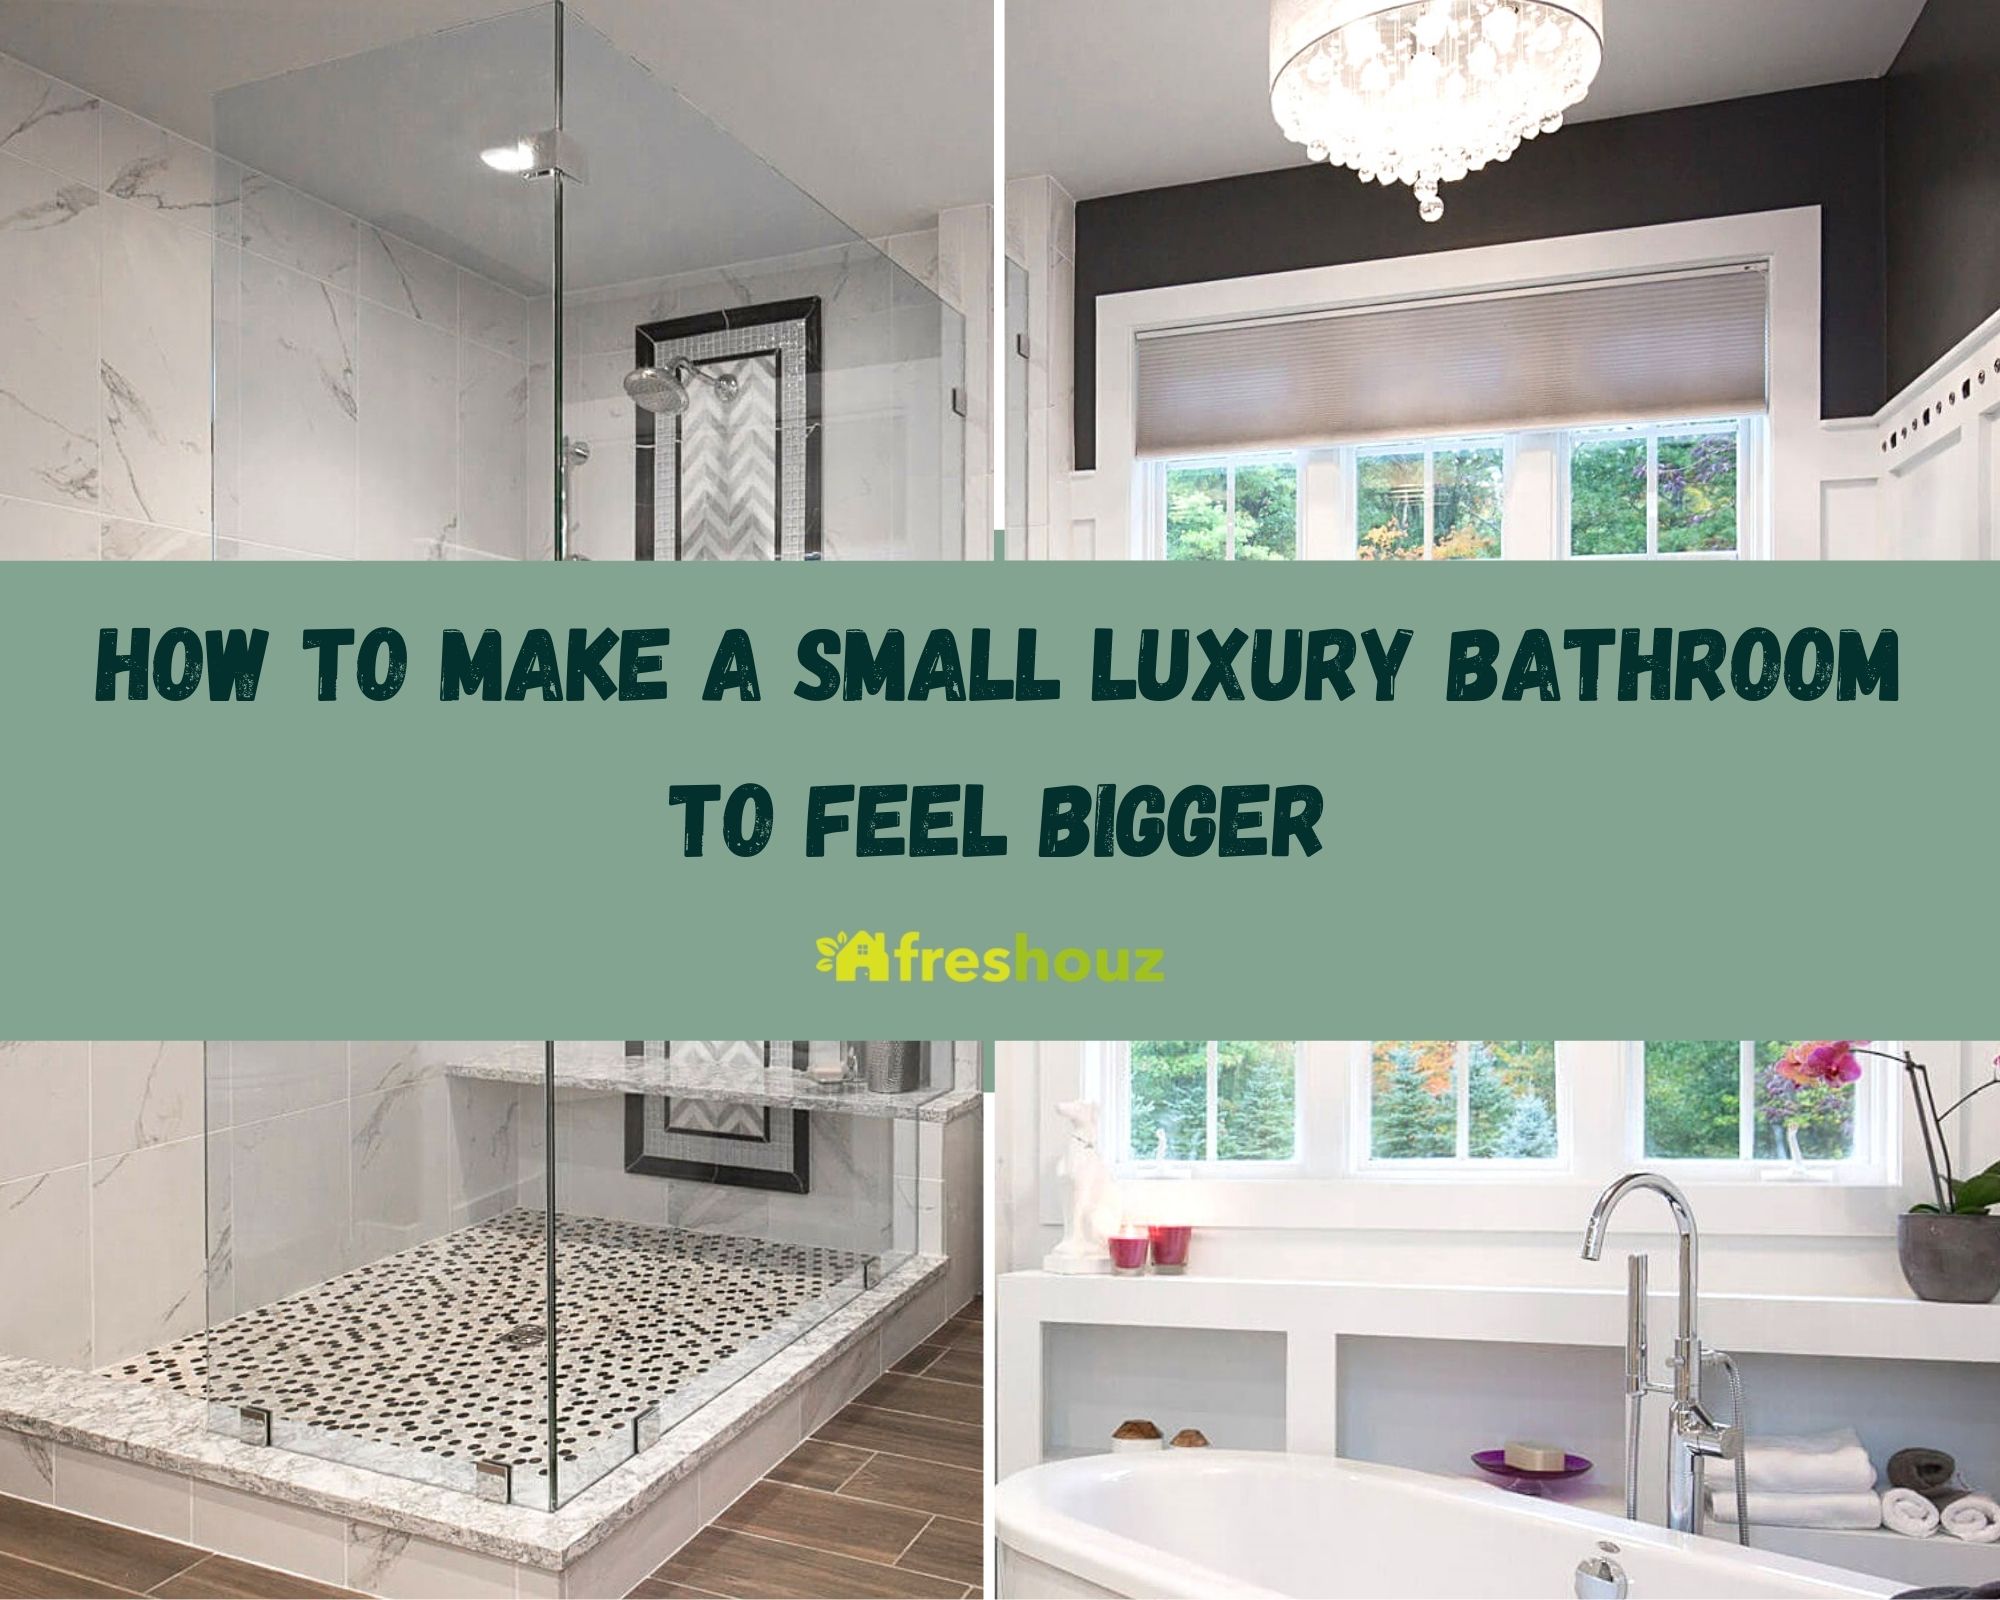 How To Make A Small Luxury Bathroom To Feel Bigger